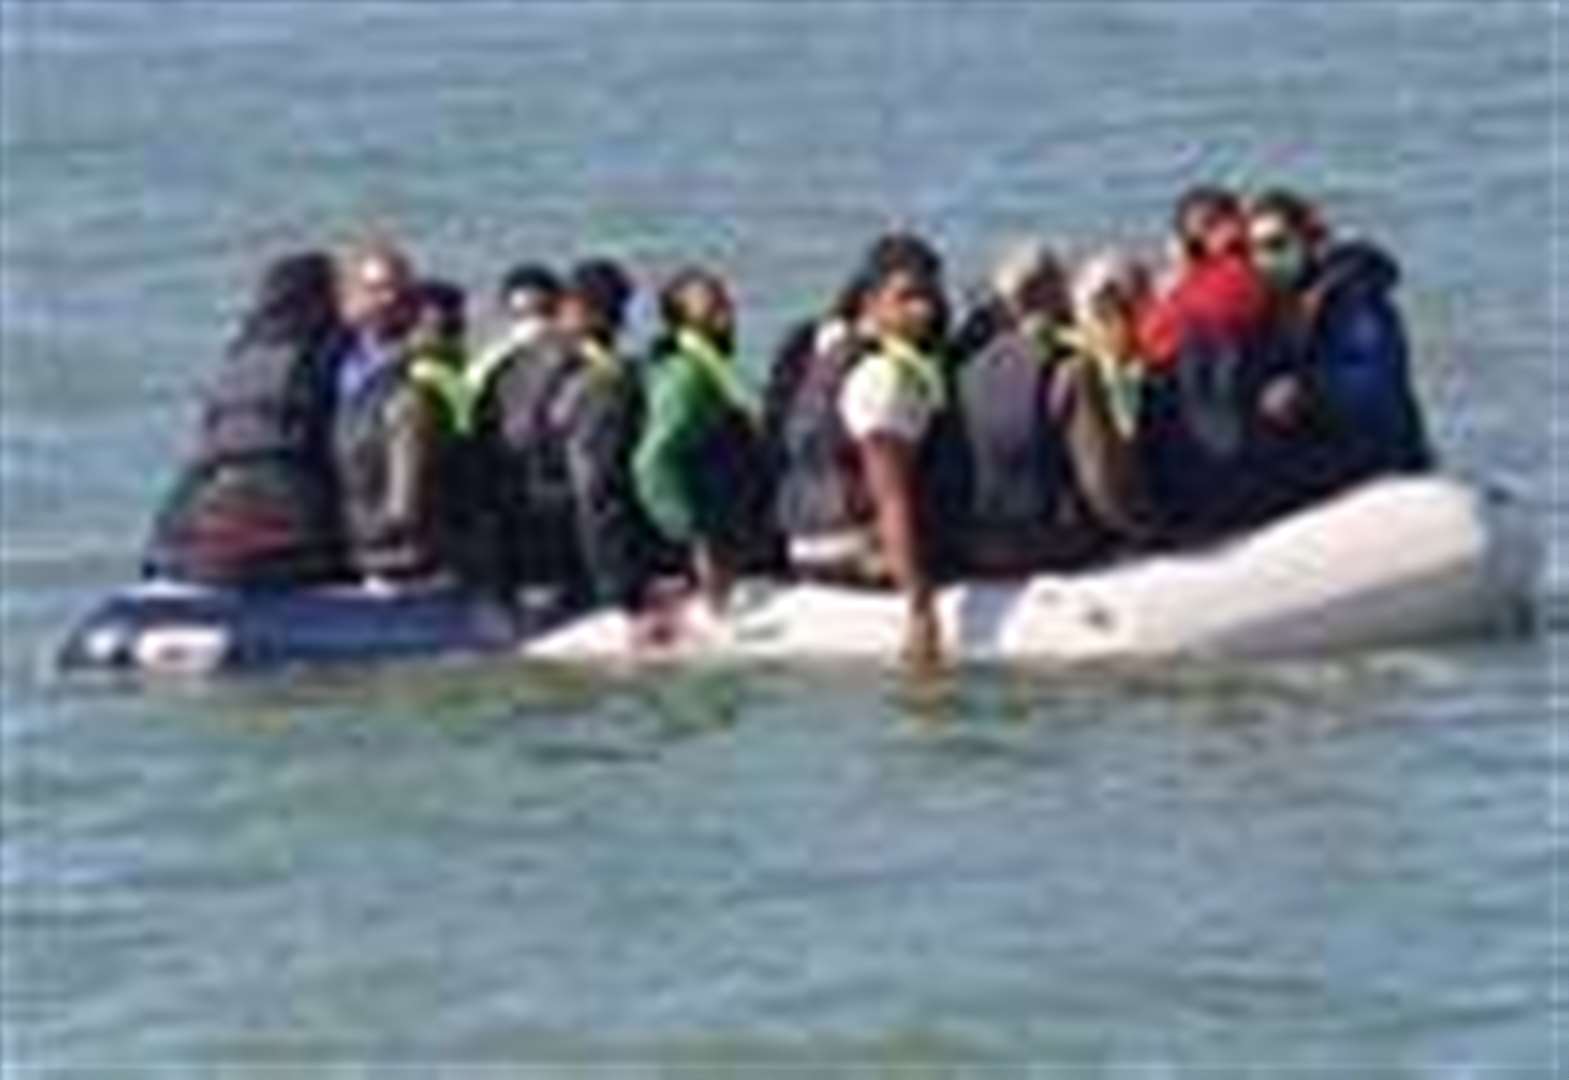 Four refugees dead in Channel tragedy